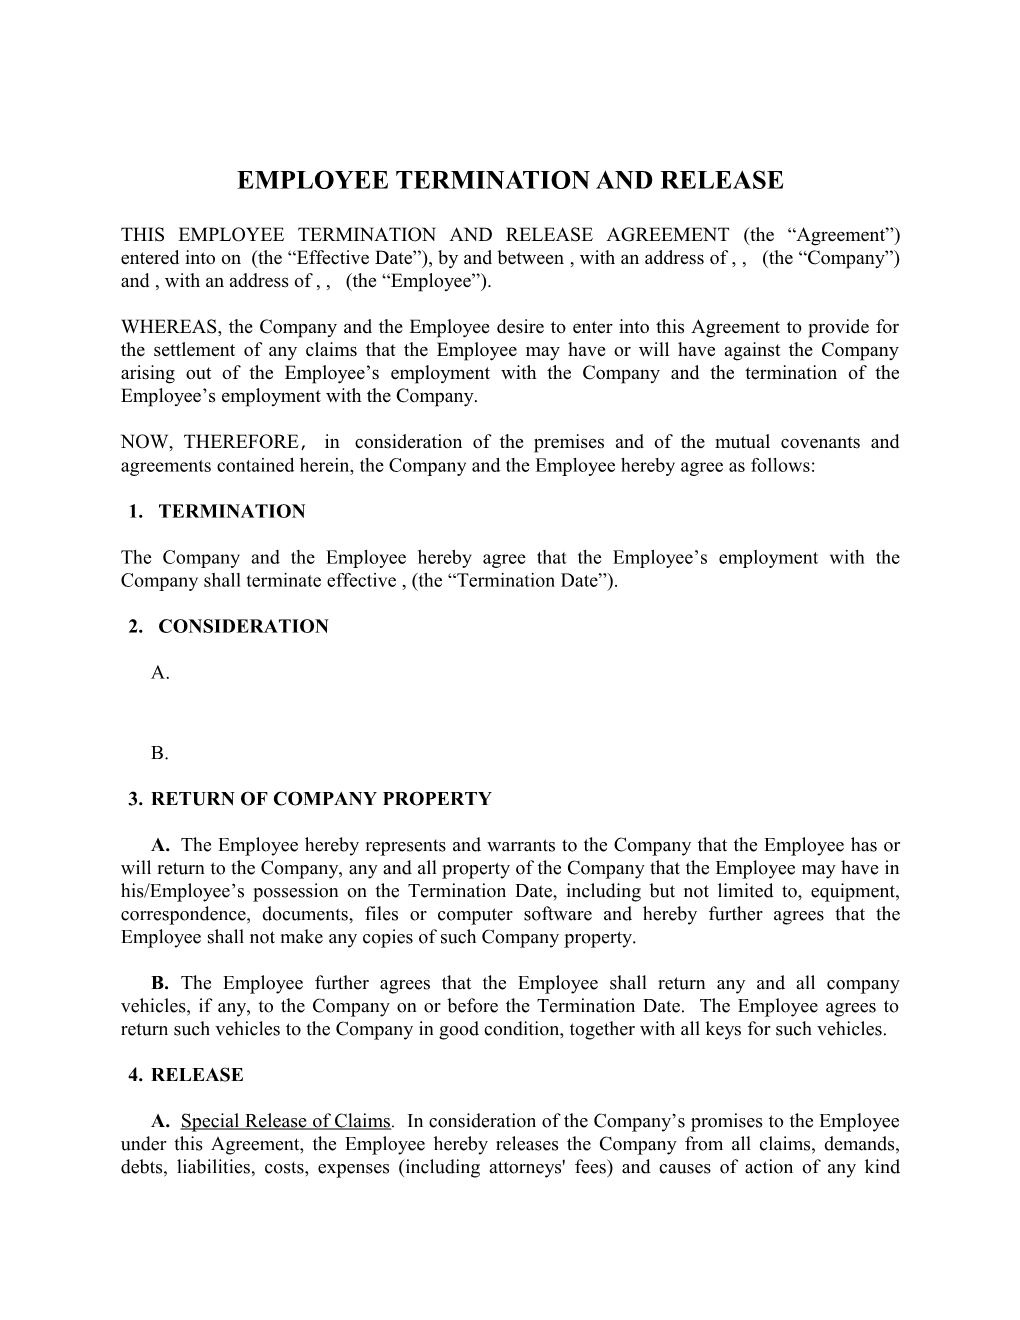 Employee Termination and Release